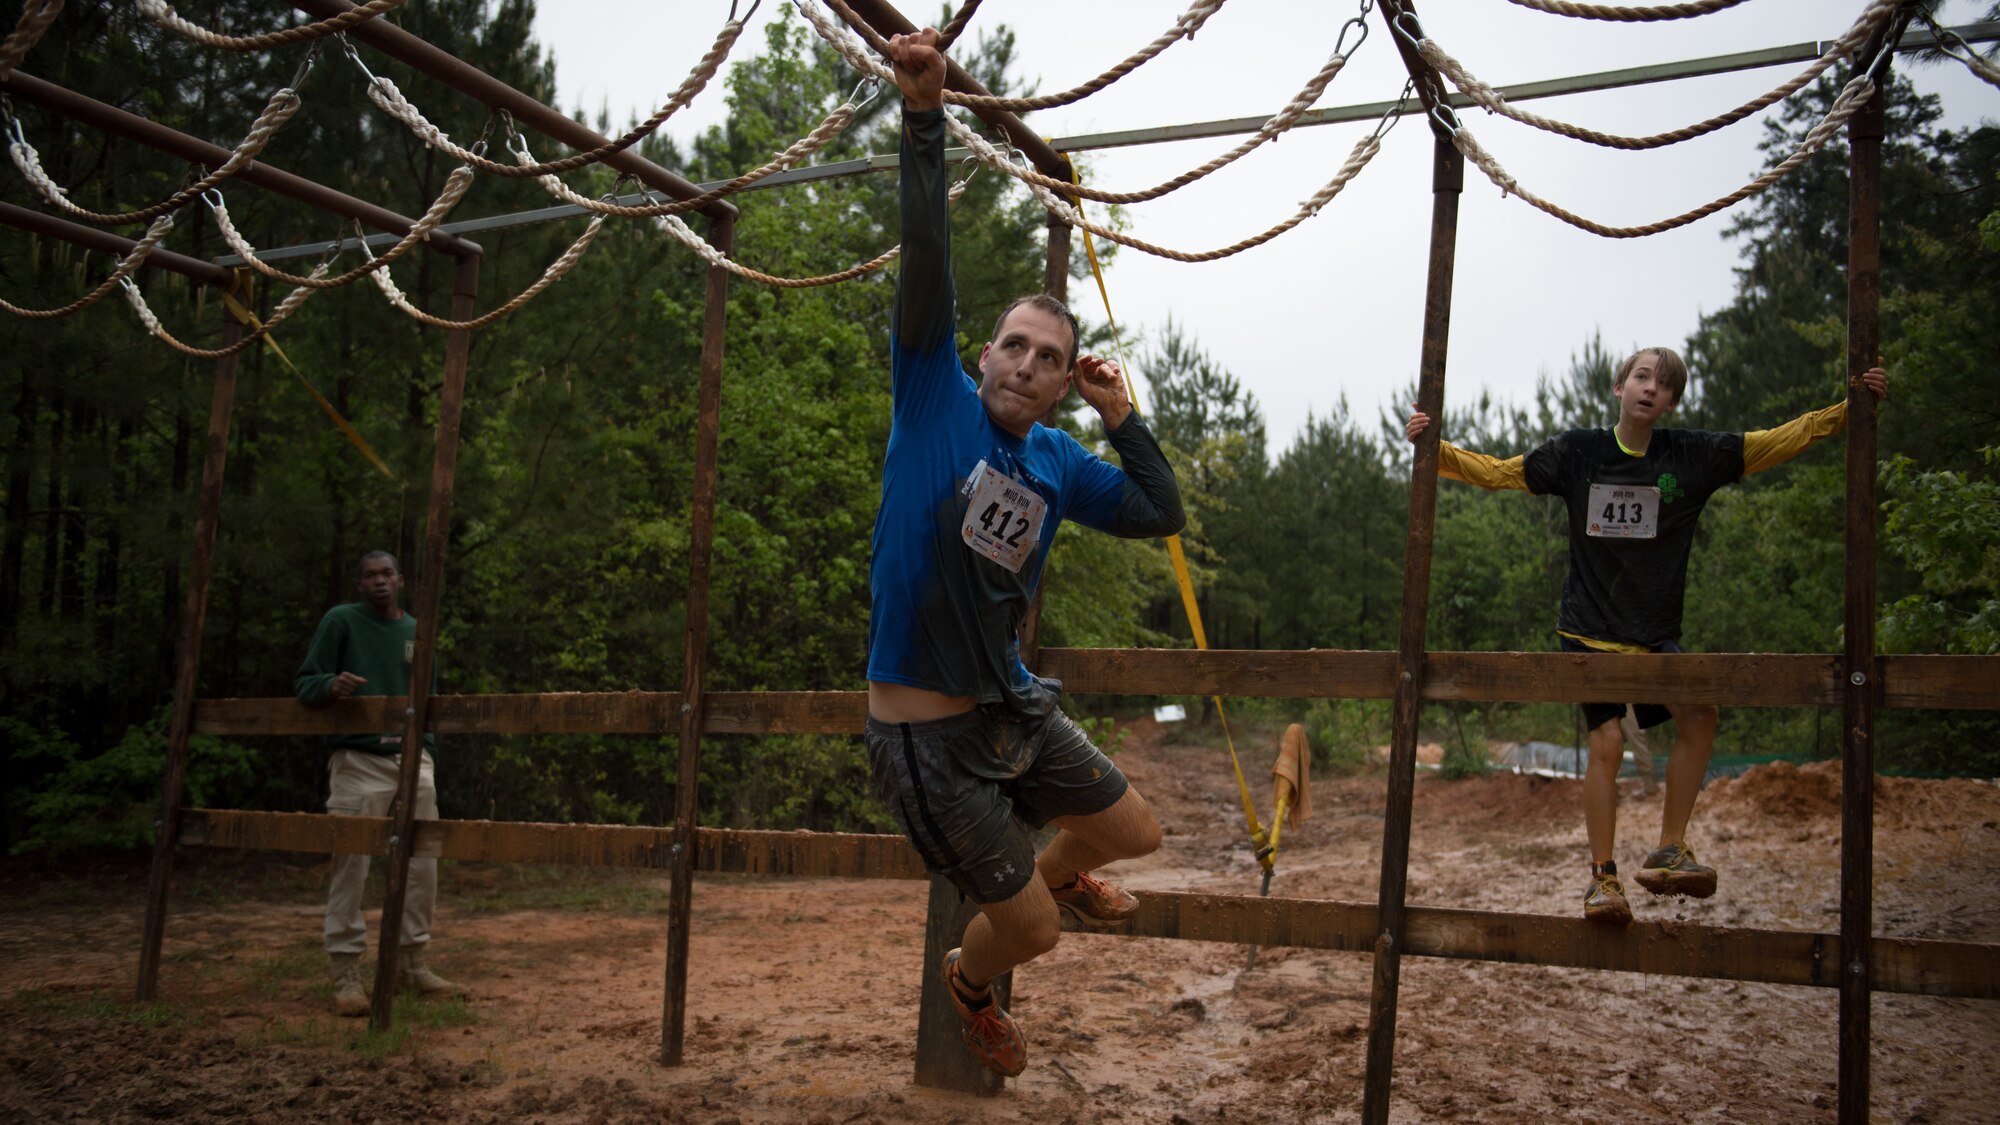 2018 Defenders of Liberty mud run: Getting down and dirty